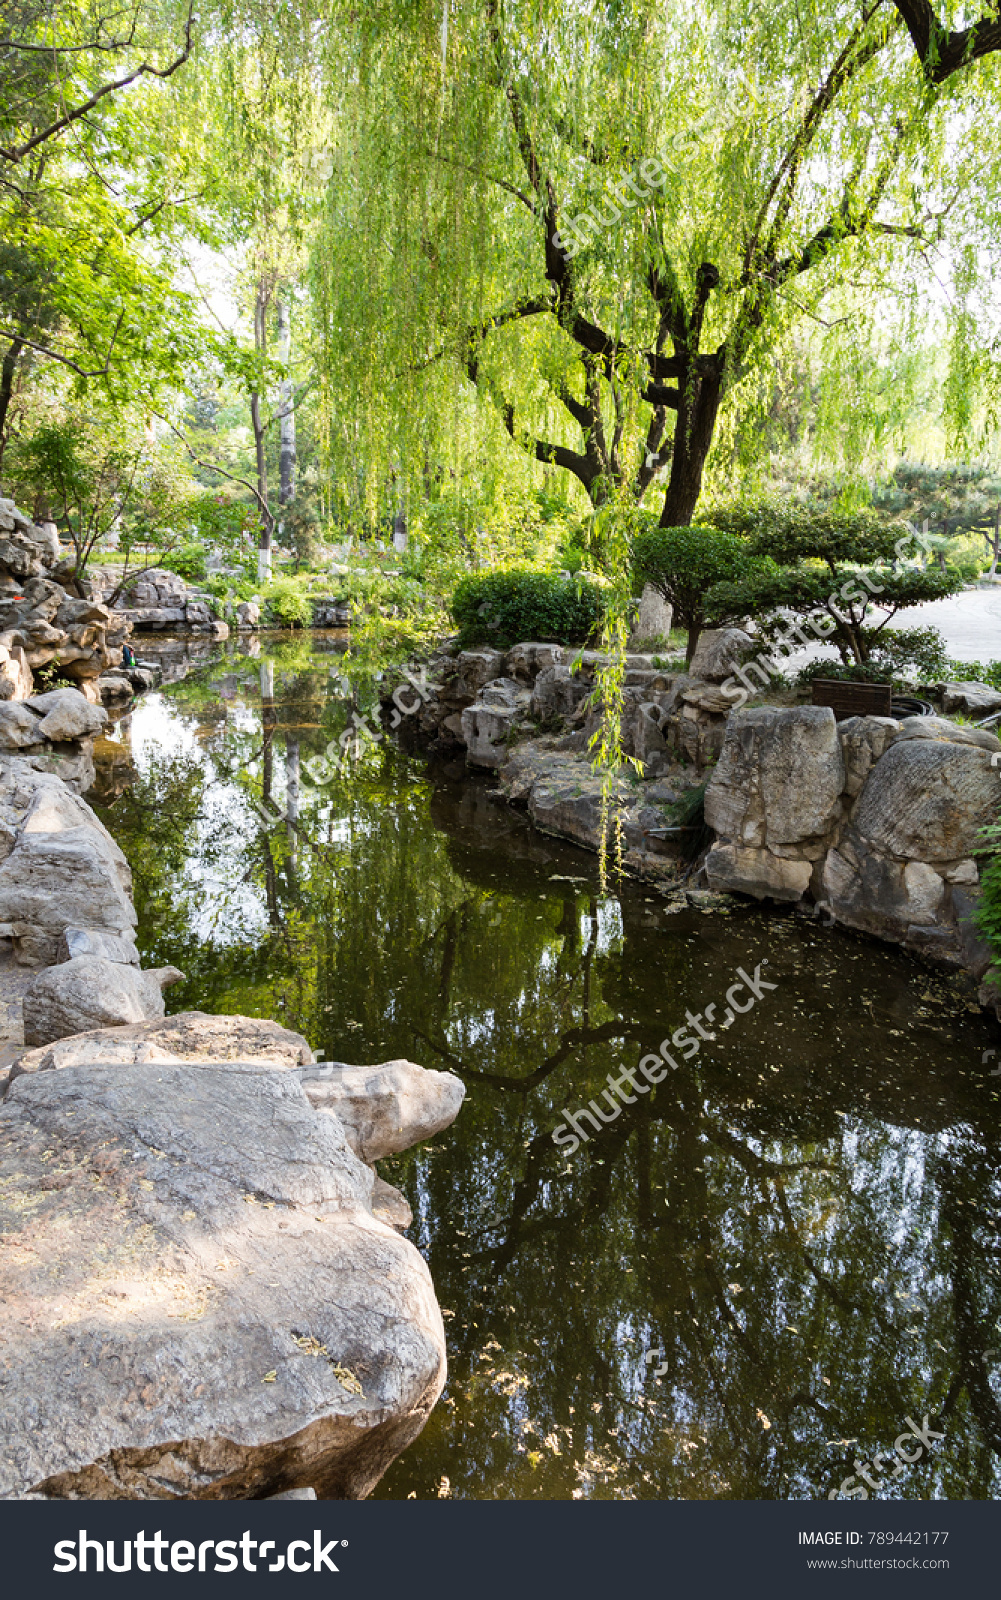 The park of Baotu Quan, also called "the Best Spring in the World" in the heart of Jinan city, Shandong, China #789442177